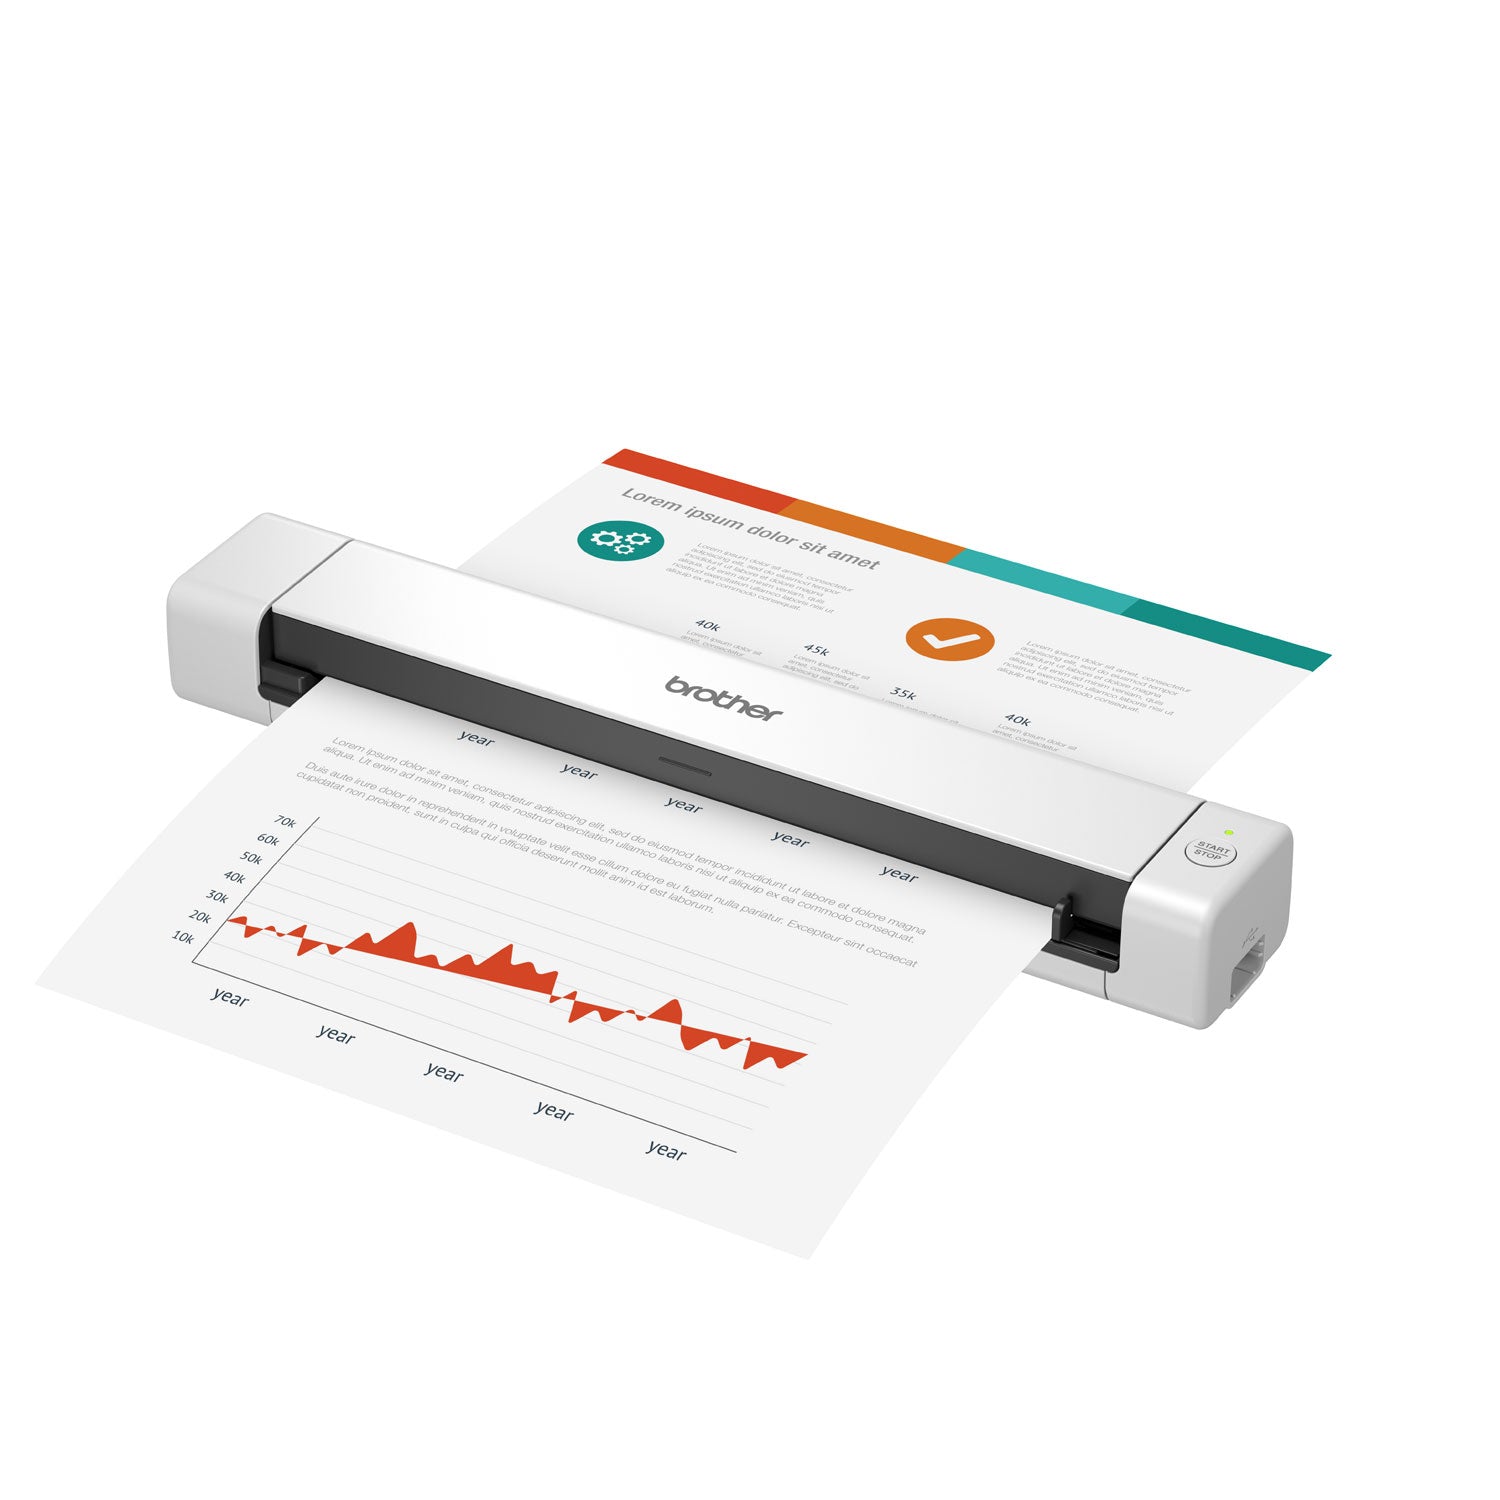 ds-640-compact-mobile-document-scanner-600-dpi-optical-resolution-1-sheet-auto-document-feeder_brtds640 - 1